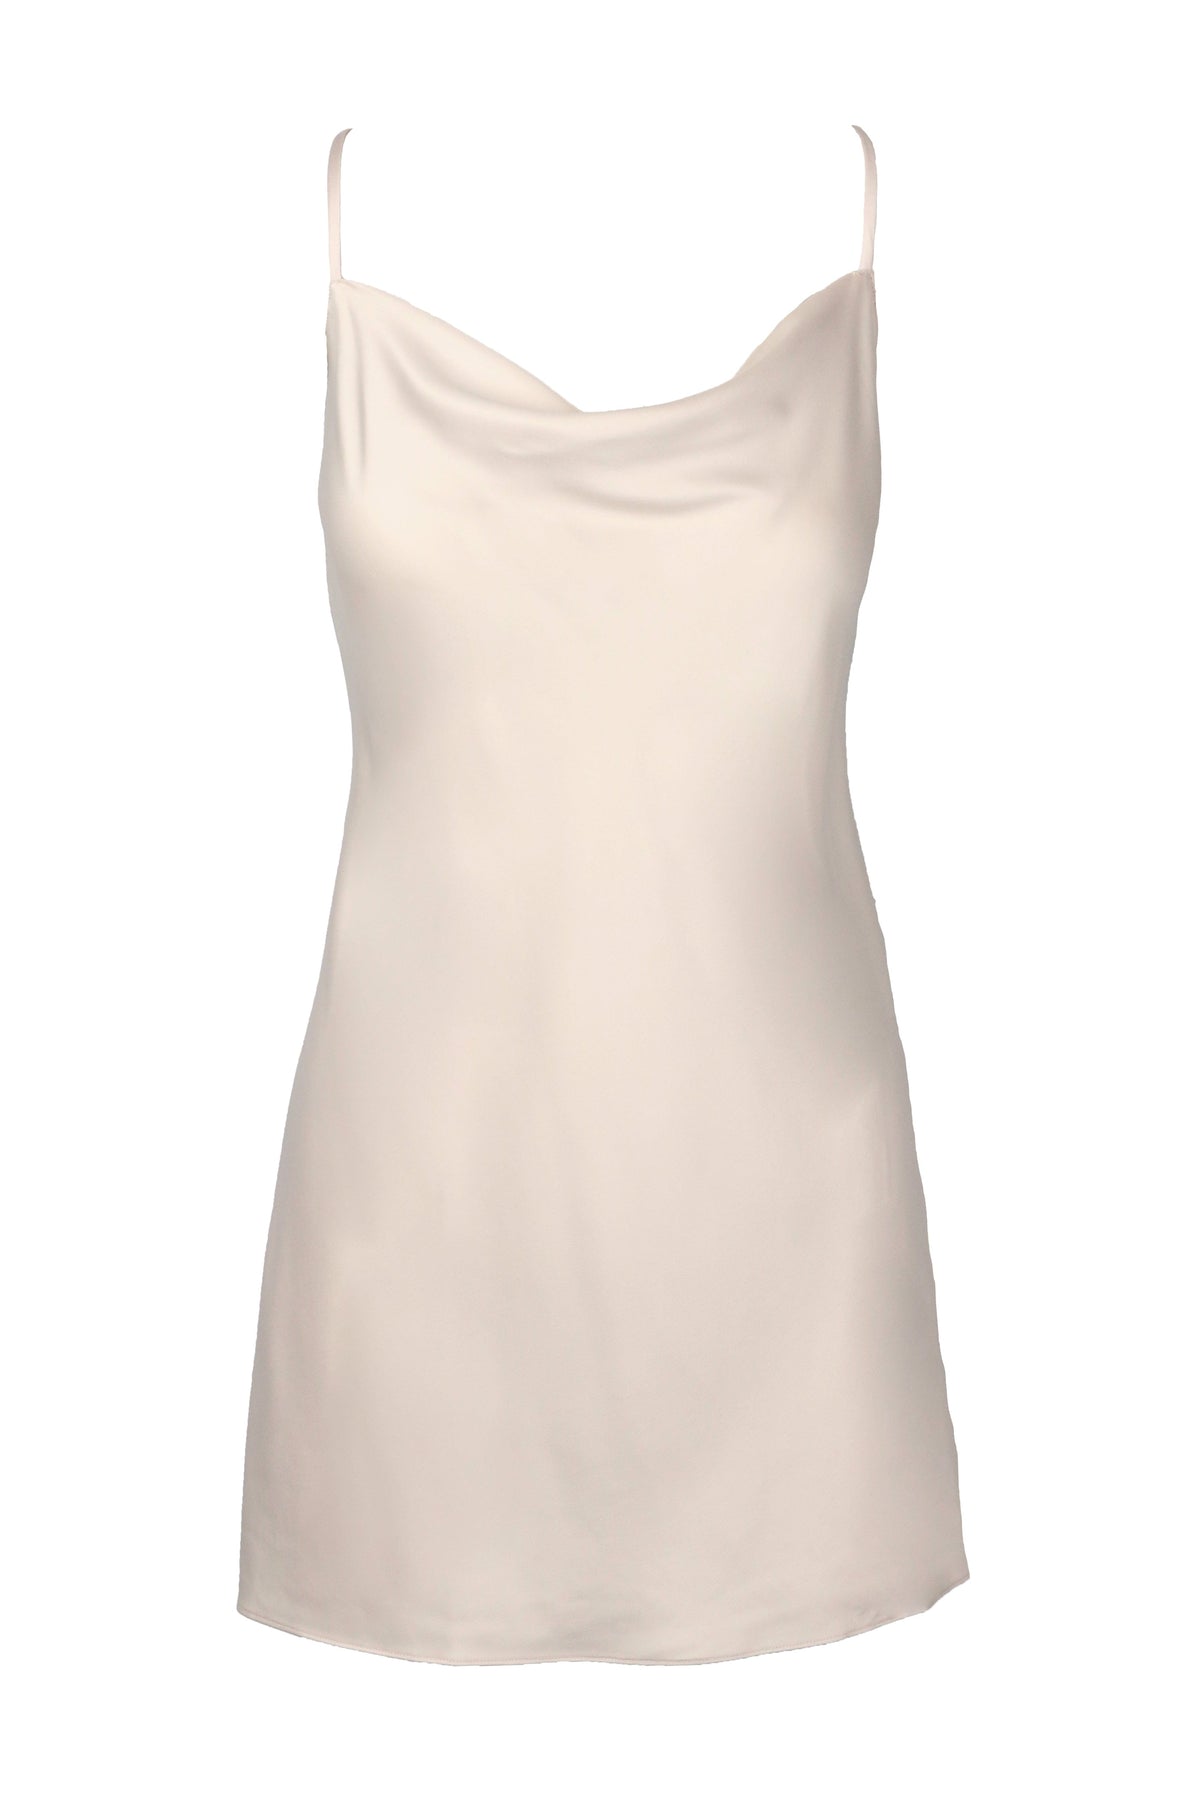 Rya Collection Chemise Champagne / 1X Darling Plus Chemise - Champagne